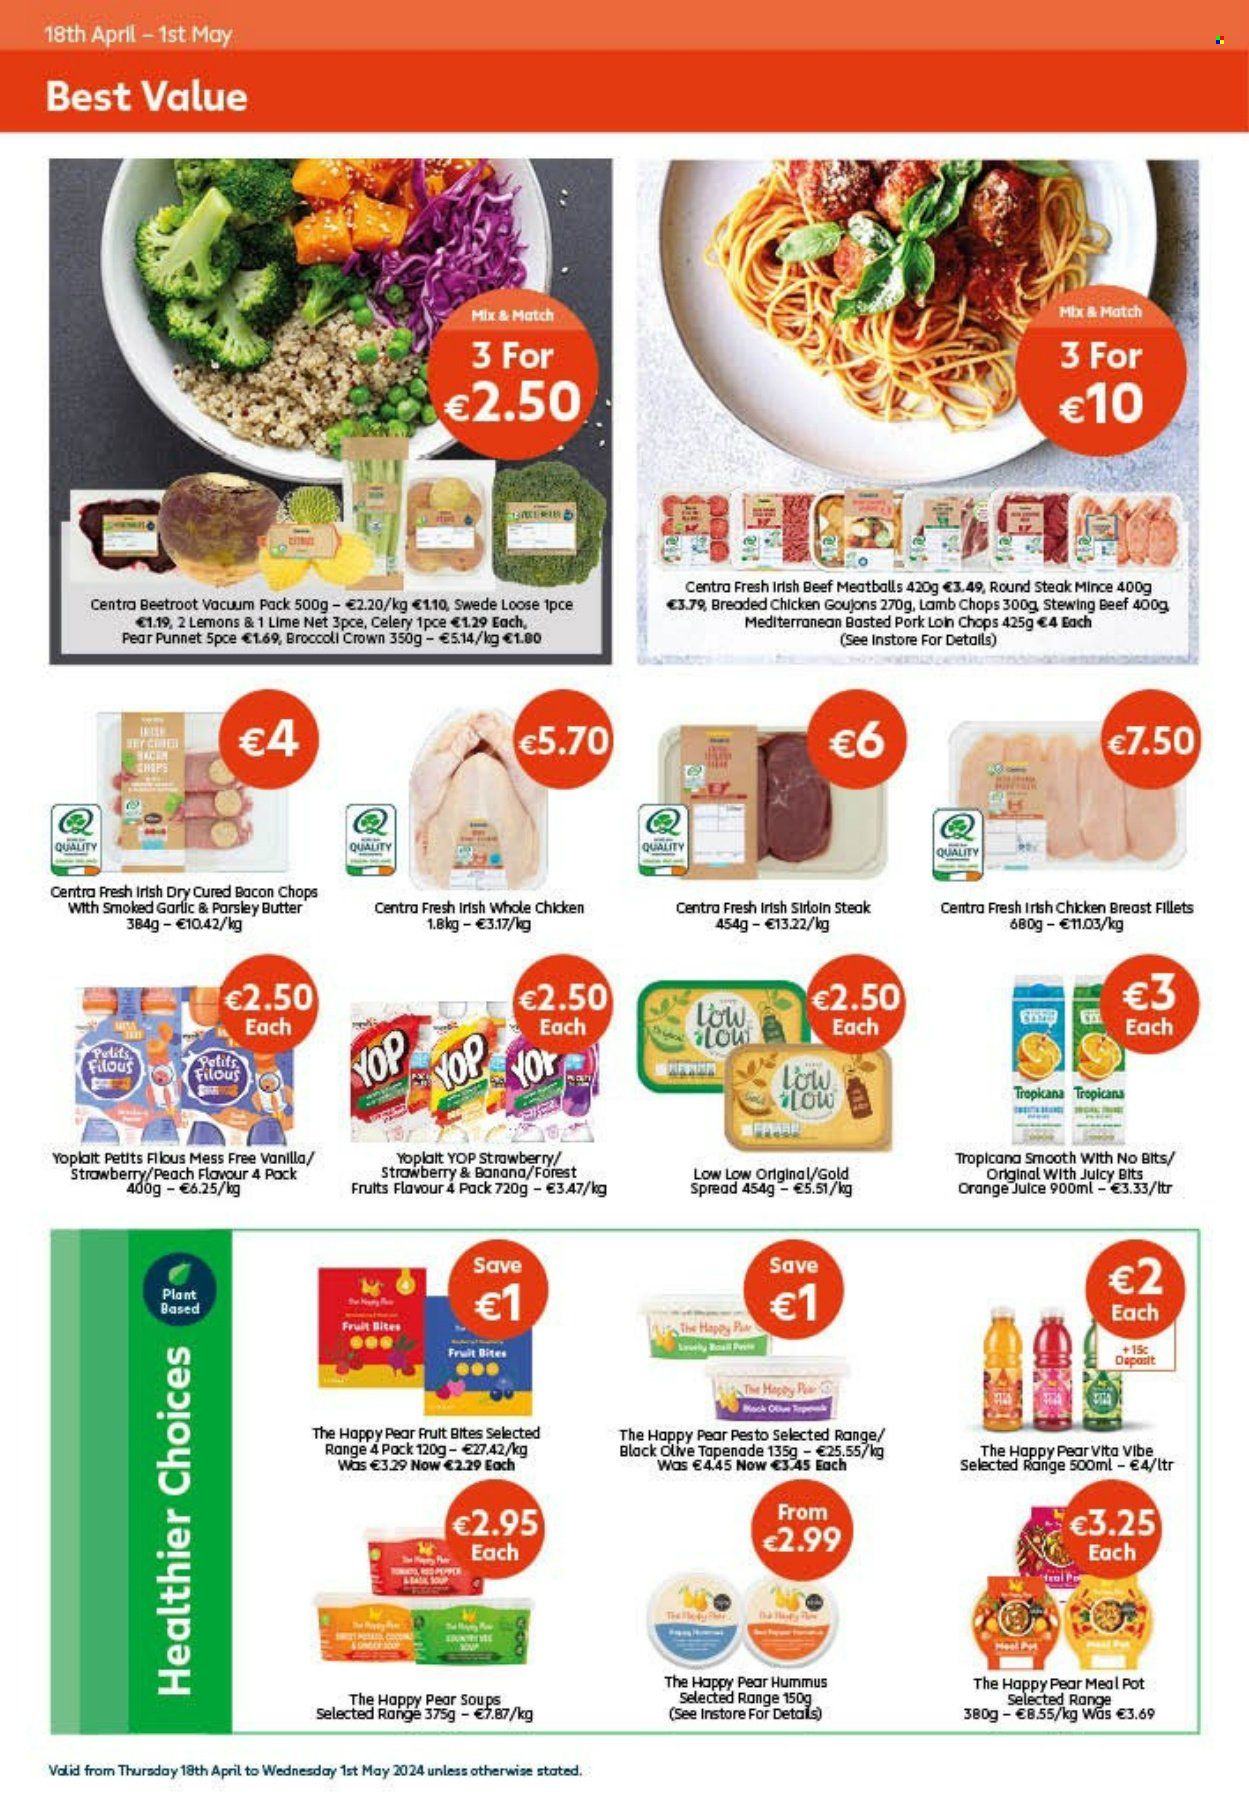 thumbnail - Centra offer  - 18.04.2024 - 01.05.2024 - Sales products - broccoli, celery, sweet potato, parsley, limes, pears, lemons, meatballs, soup, breaded chicken, bacon, chicken breasts, hummus, olive spread, tapenade, yoghurt, Petits Filous, Yoplait, yoghurt drink, chips, olives, pesto, juice, whole chicken, beef meat, beef sirloin, ground beef, sirloin steak, stewing beef, pork chops, pork loin, pork meat, lamb chops, pot. Page 4.